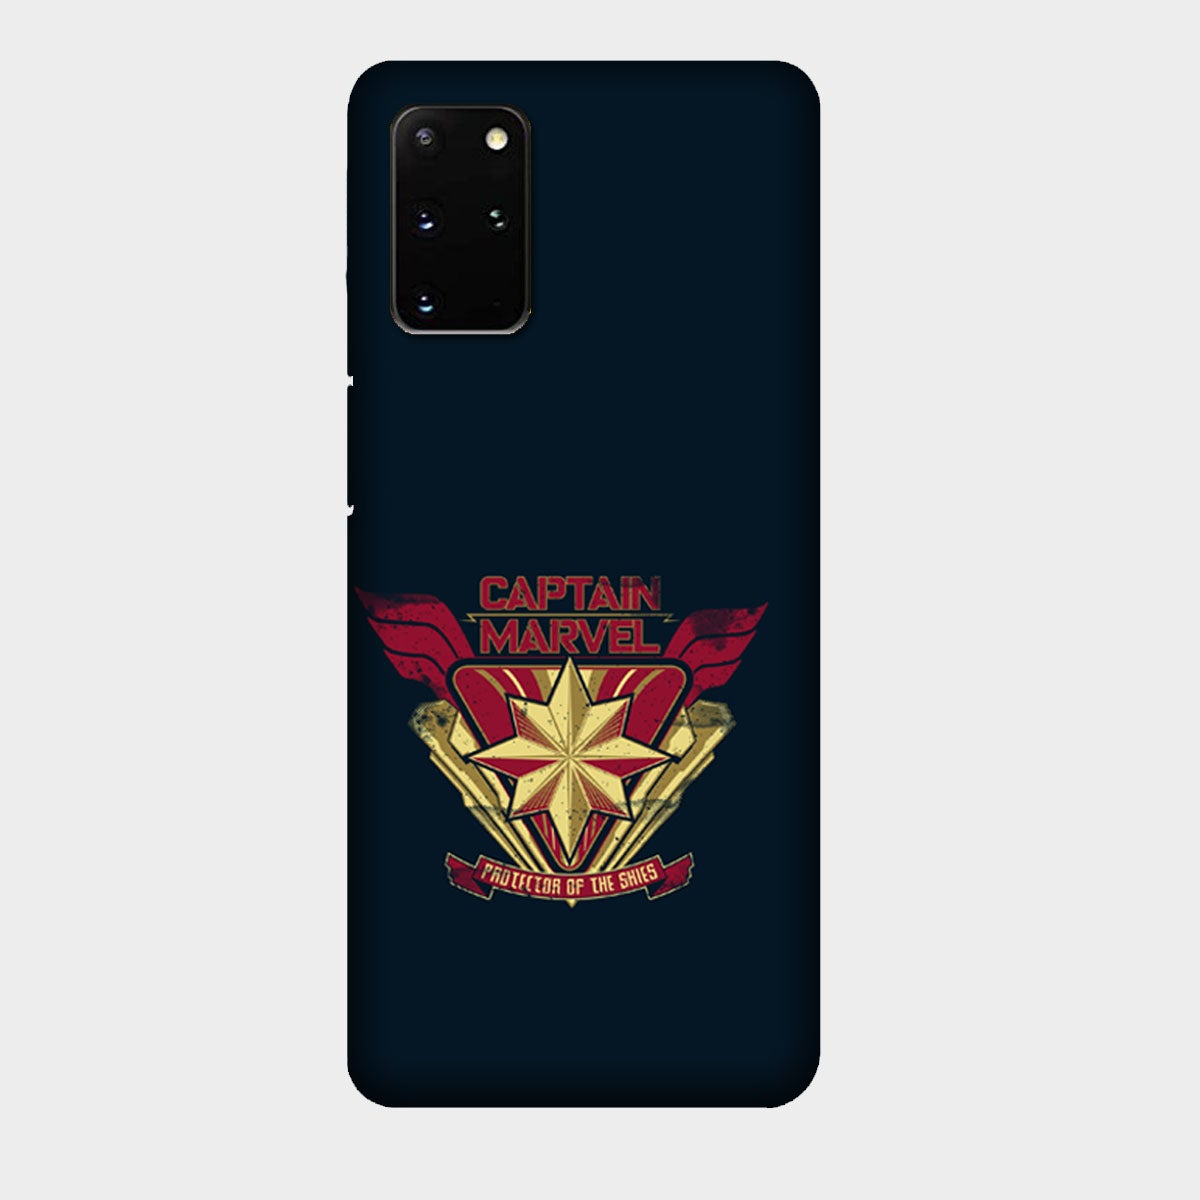 Captain Marvel - Protector of the Skies - Mobile Phone Cover - Hard Case - Samsung - Samsung